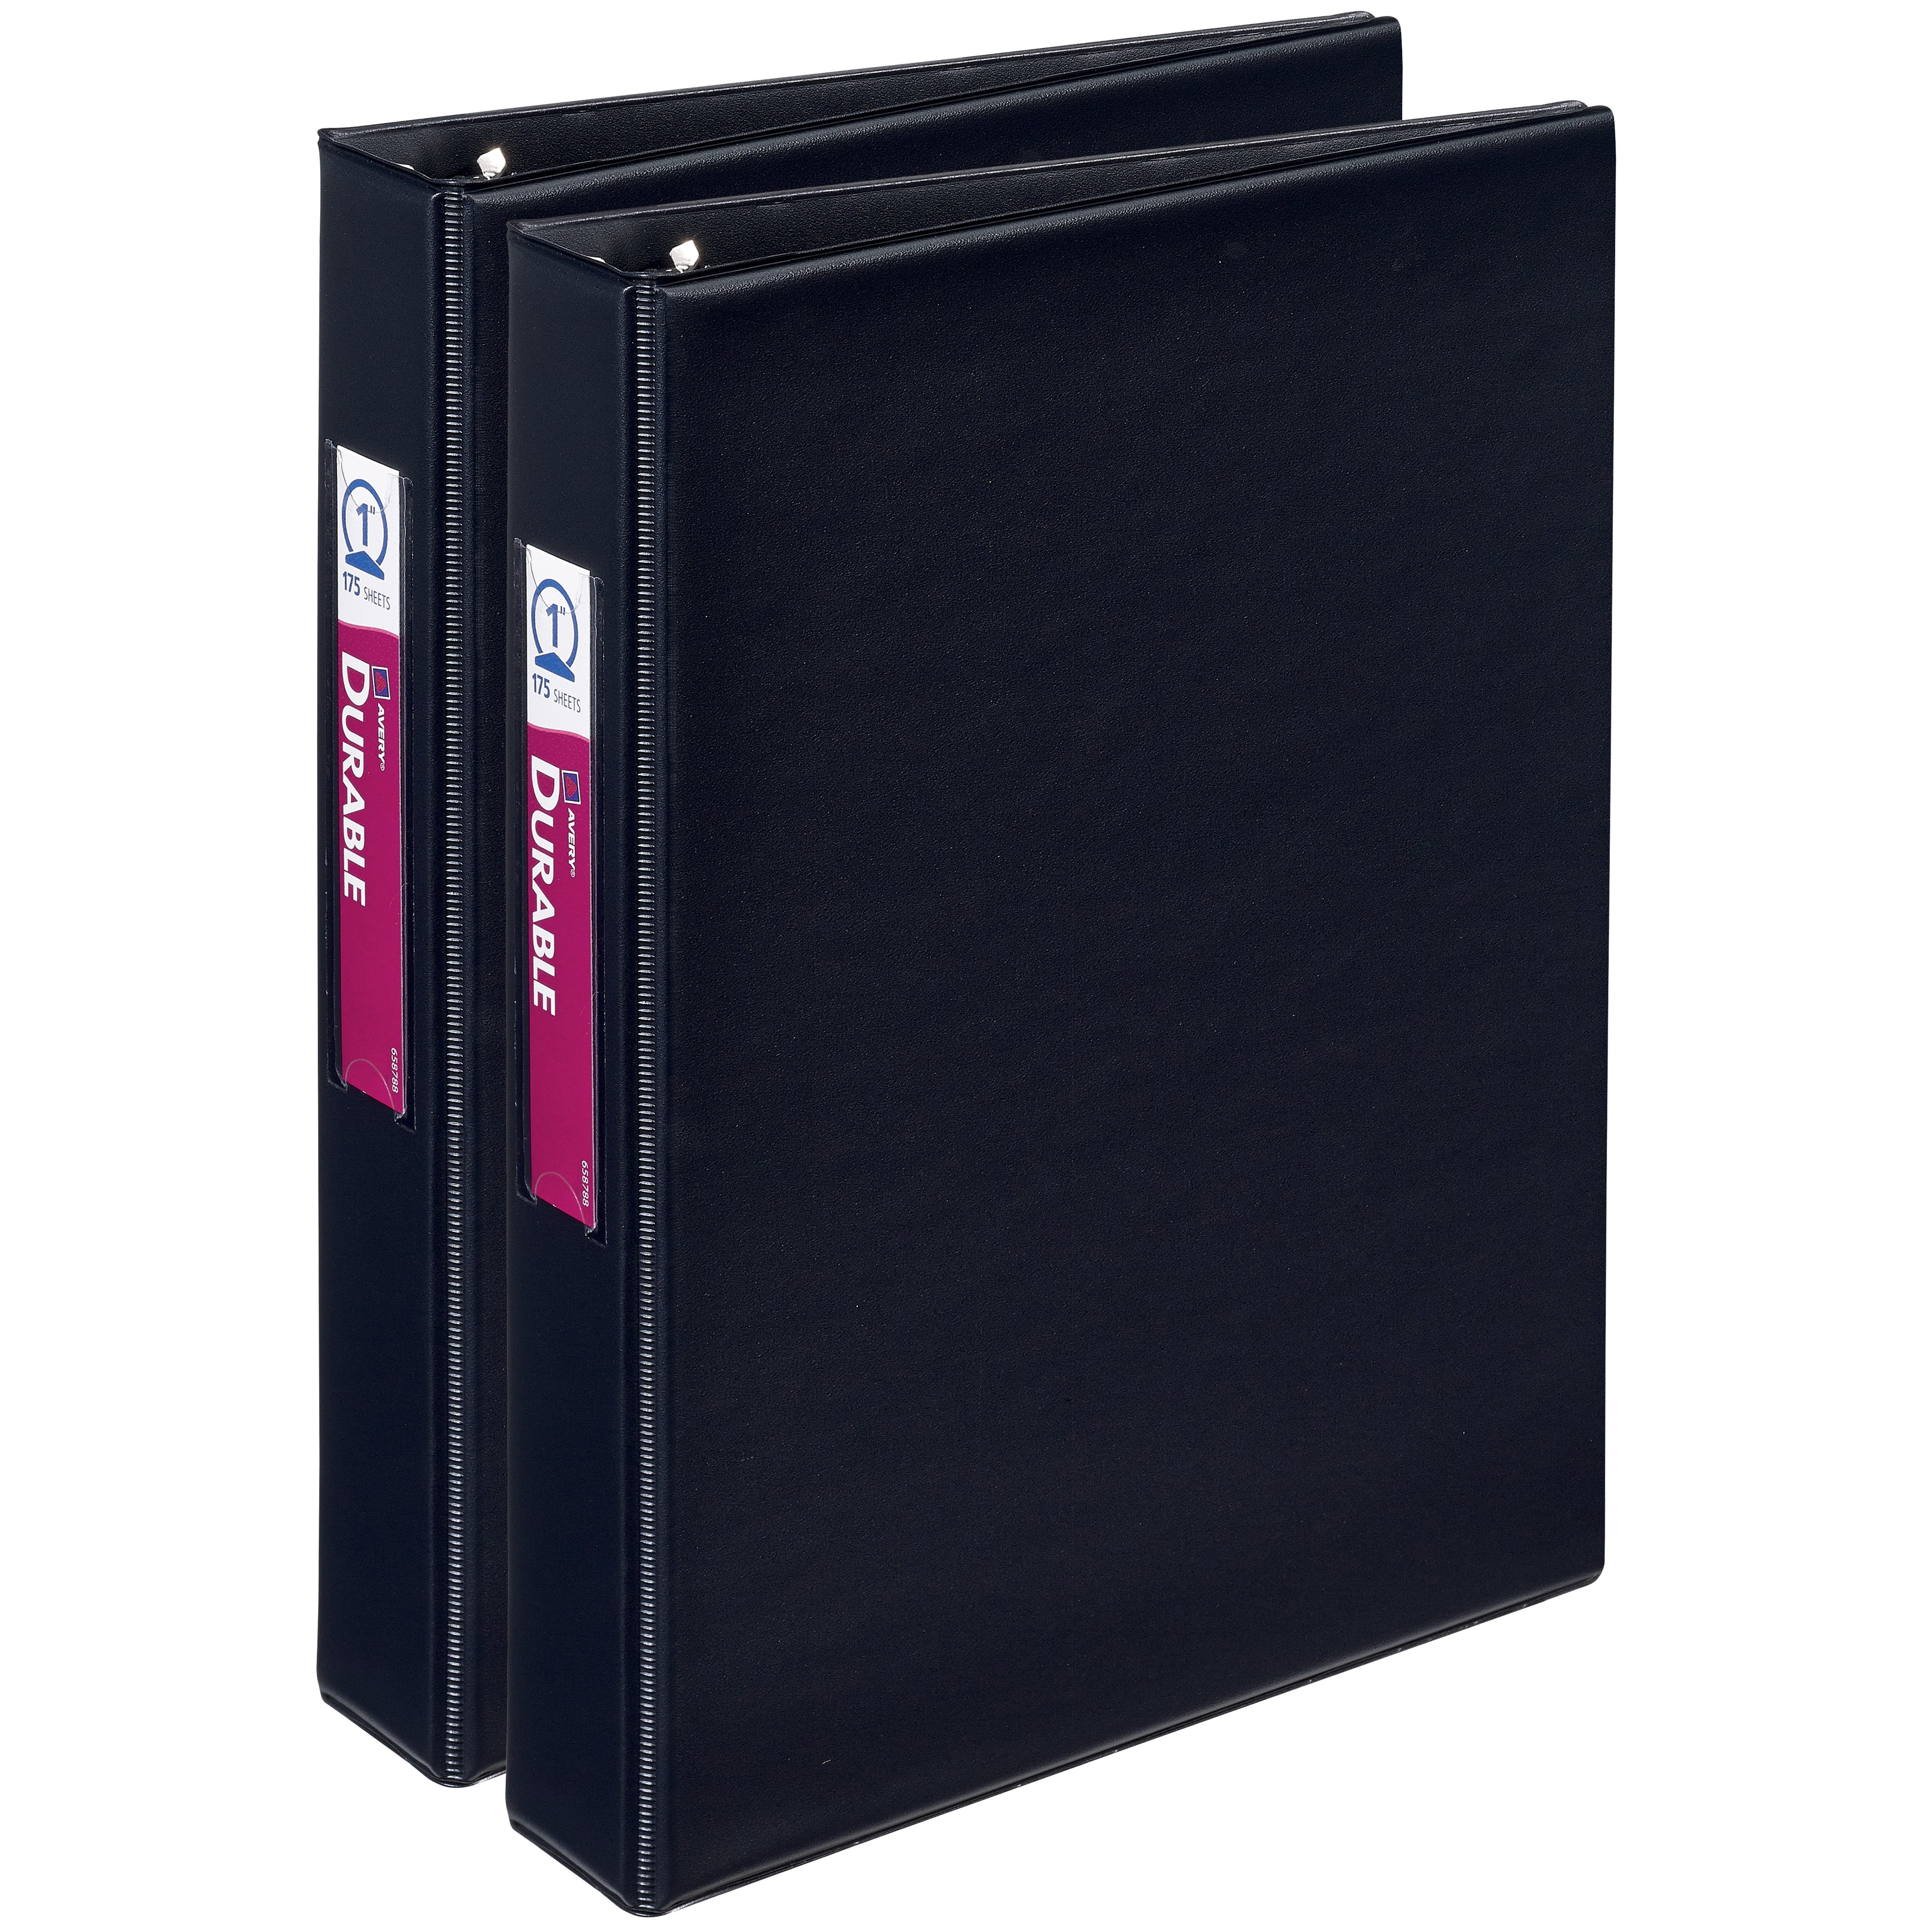 Amazon.com : Avery Heavy-Duty 3 Ring Binder, 1 Inch Slant Rings, Mint View  Binder (79270) : Office Products